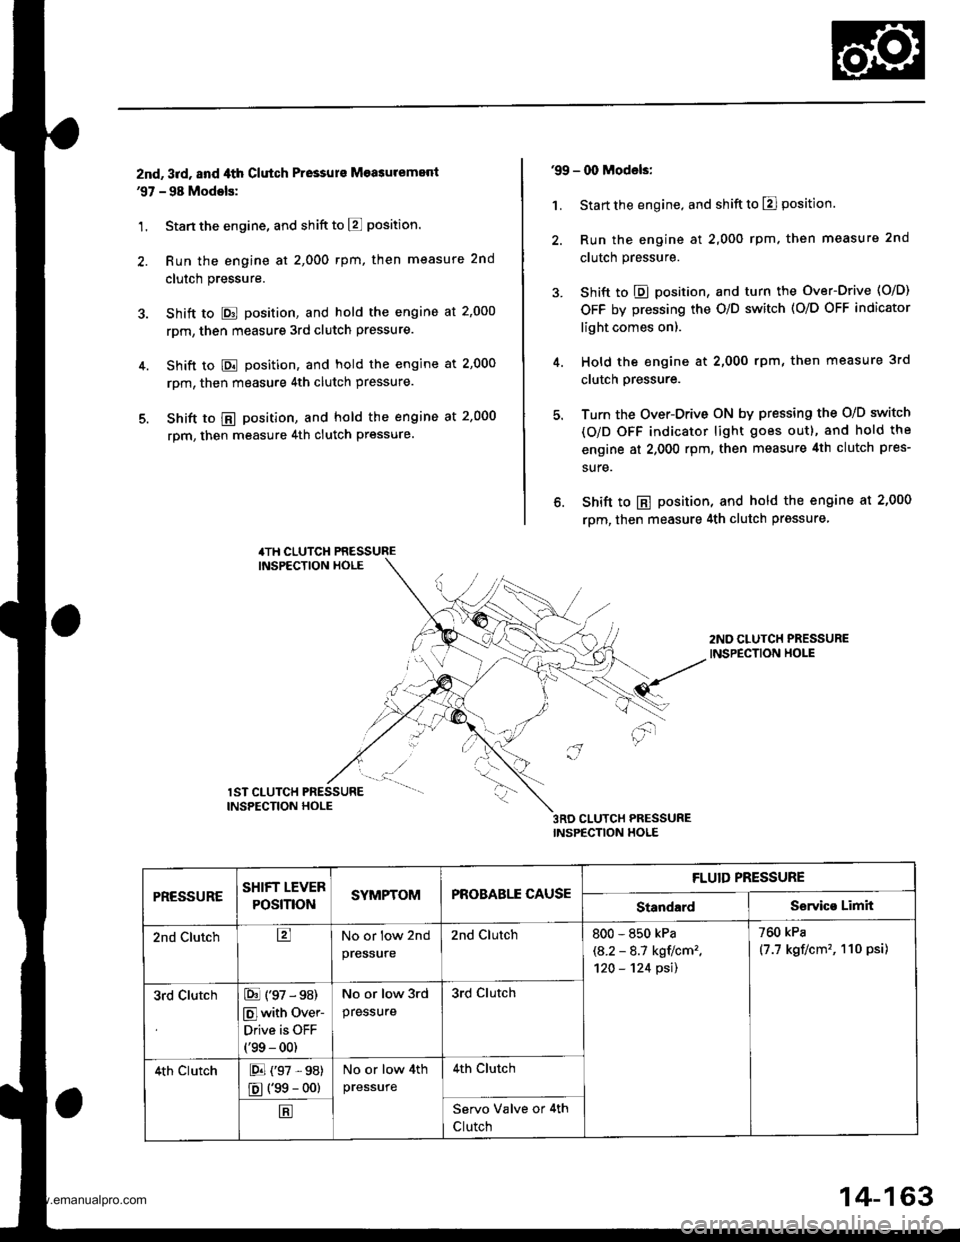 HONDA CR-V 1997 RD1-RD3 / 1.G Service Manual 
znd, 3rd, and ,lth Clutch Pressurs Measuremenl97 - 98 Modols:
1. Stan the engine, and shift to E position.
2. Run the engine at 2,000 rpm, then measure 2nd
clutch pressure.
3. Shift to E position, a